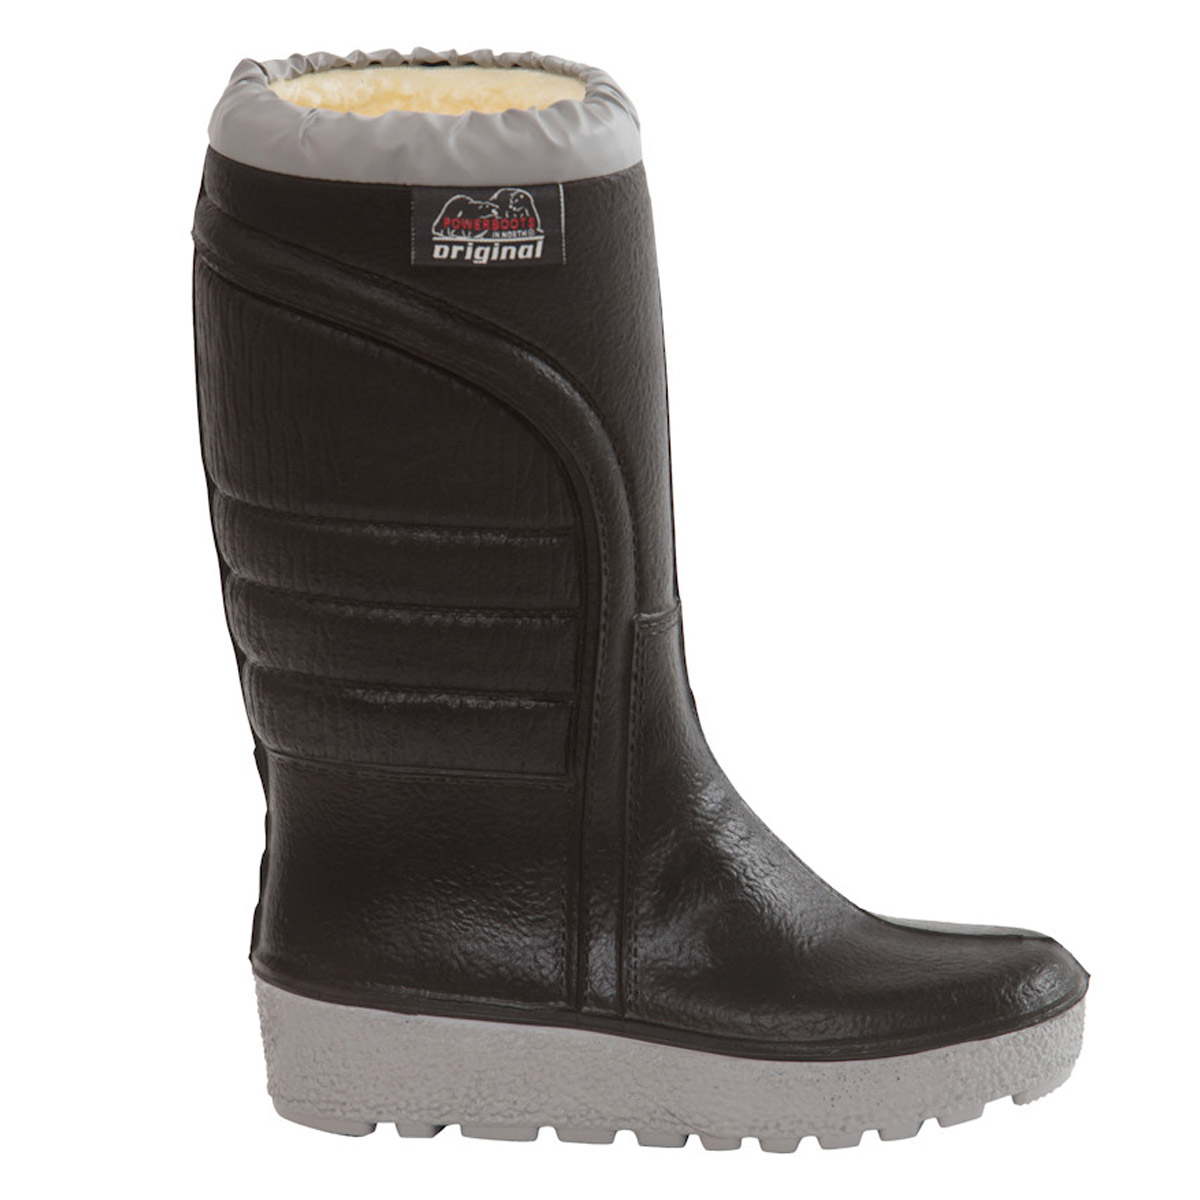 Power Boots Original PU Thermo Laars -  42 -  43 -  44 -  45 -  46-47 -  48 -  40 -  37-38 -  41 -  39